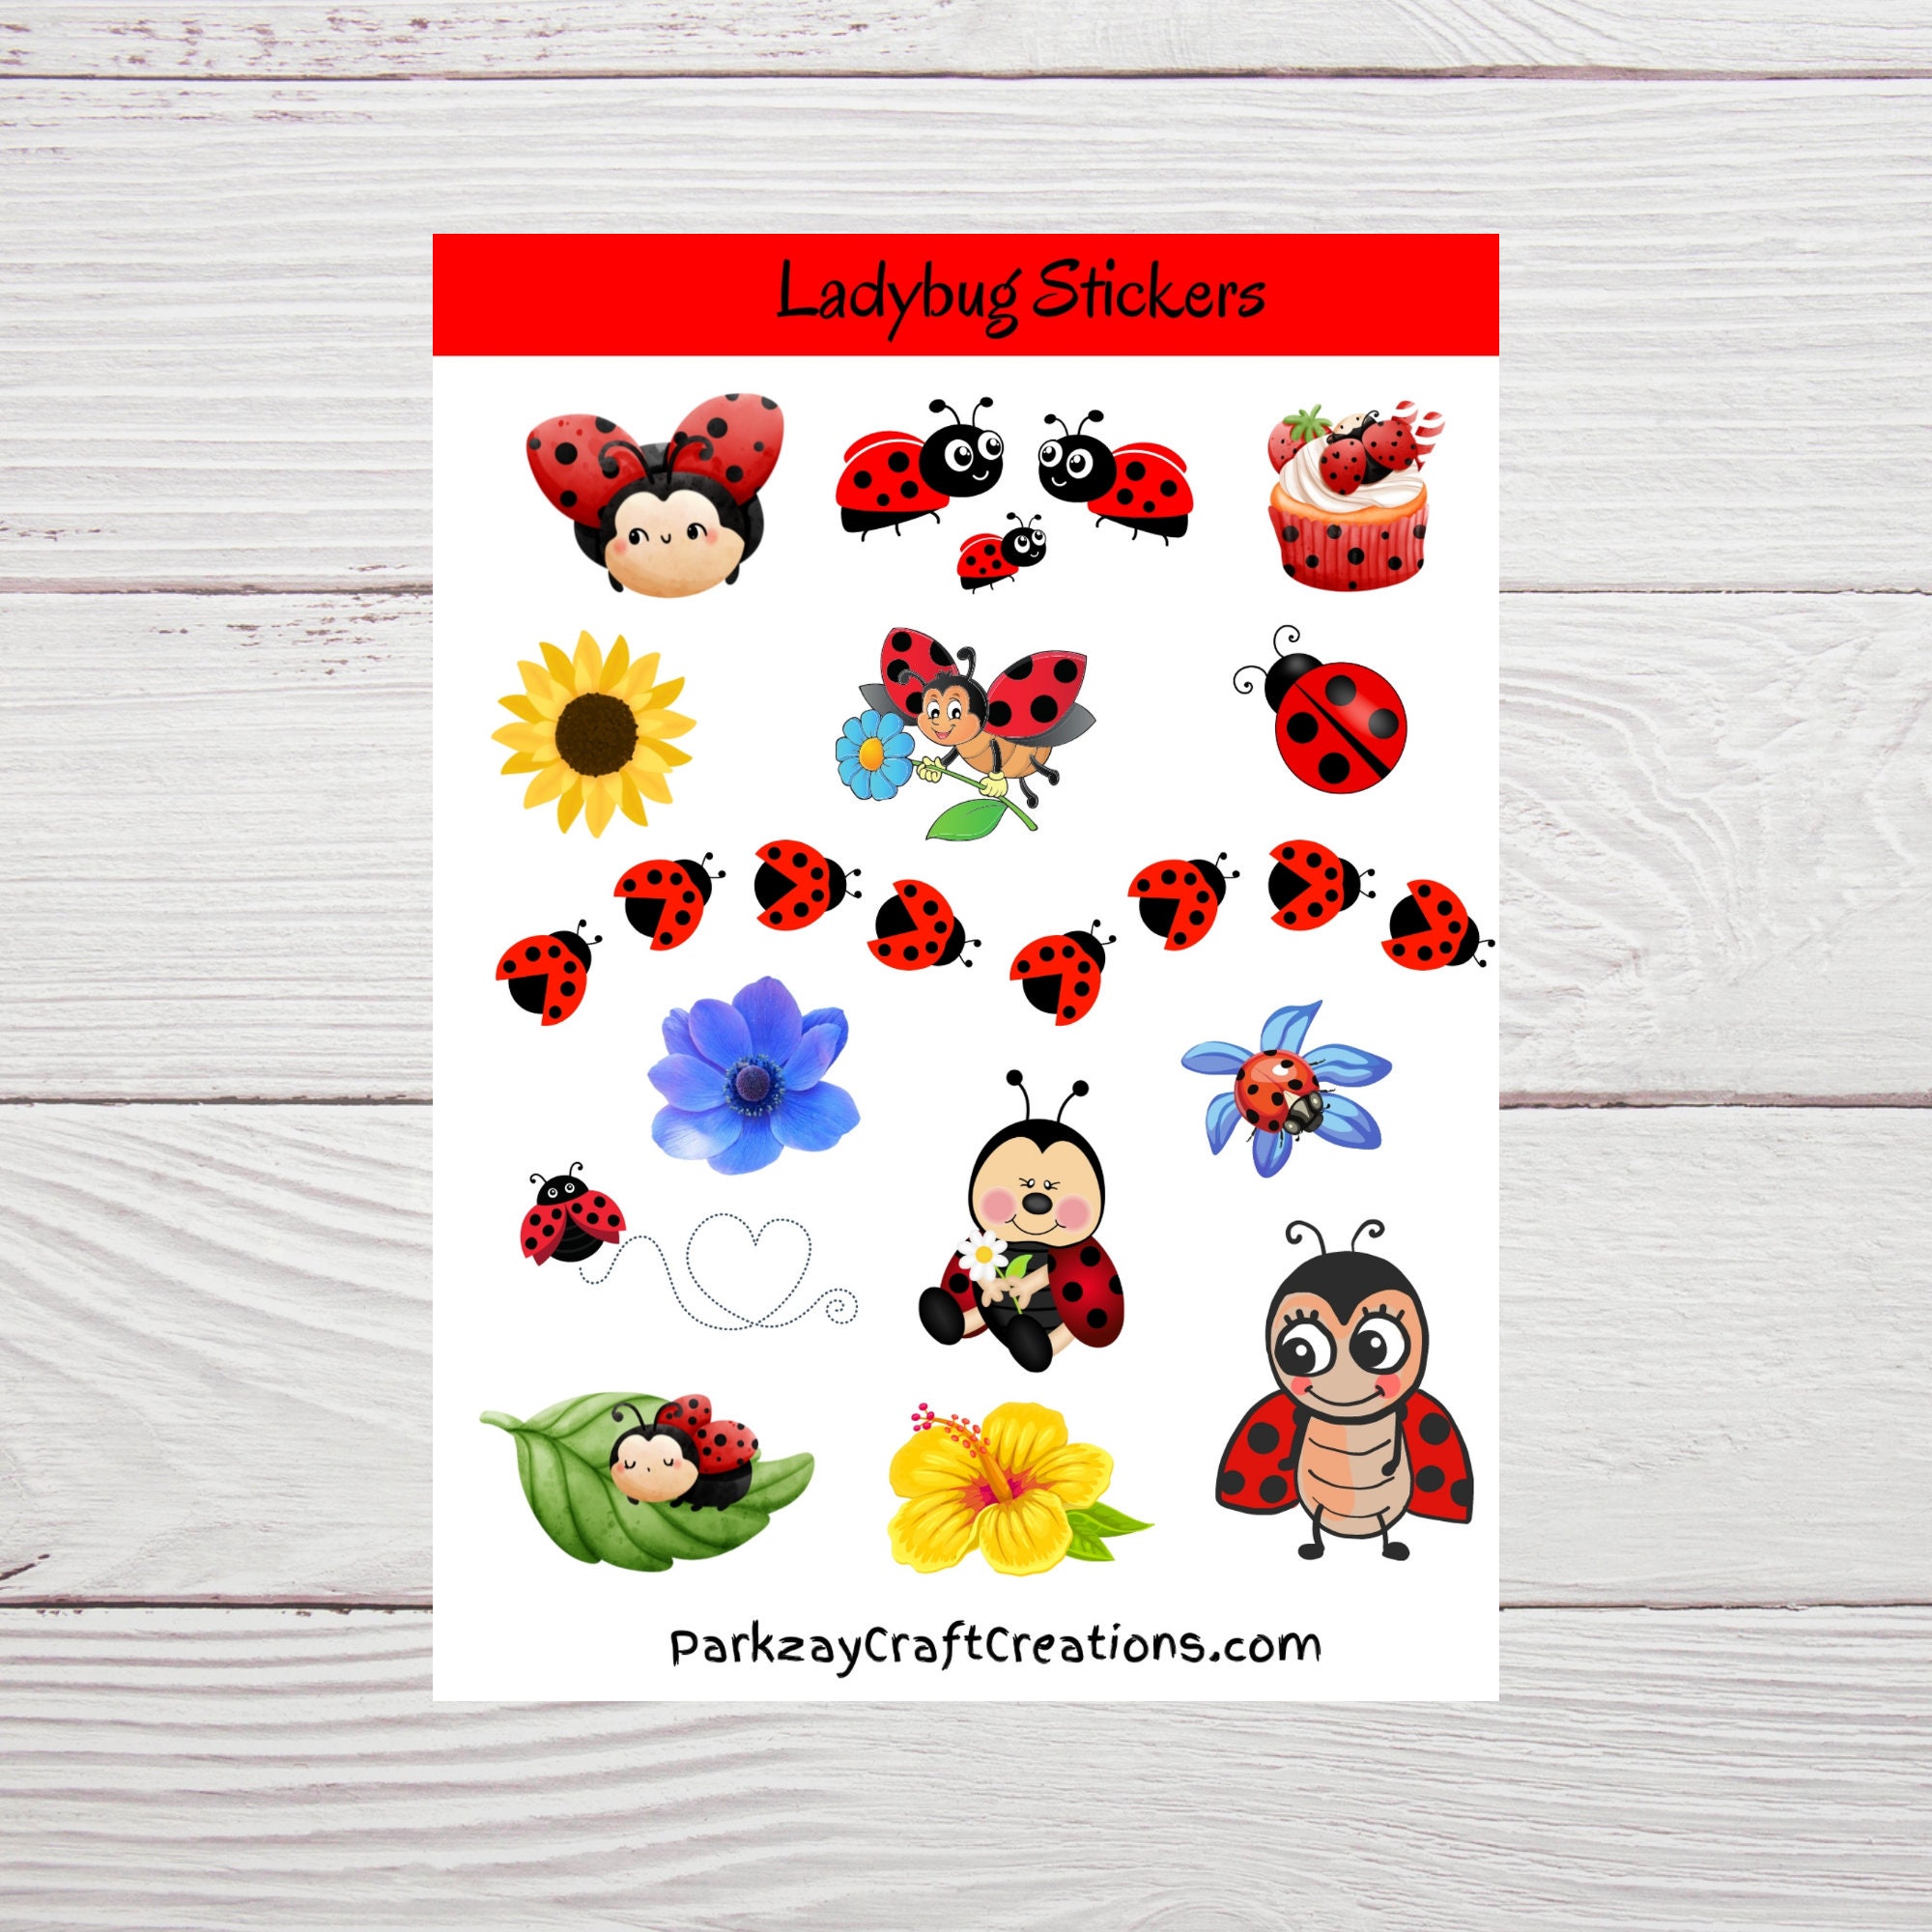 Ladybug Stickers, Sunflower Stickers, Stickers  For-laptop-journal-planner-calendar, Blue and Yellow Flowers Stickers,  Ladybug Sticker Sheet 